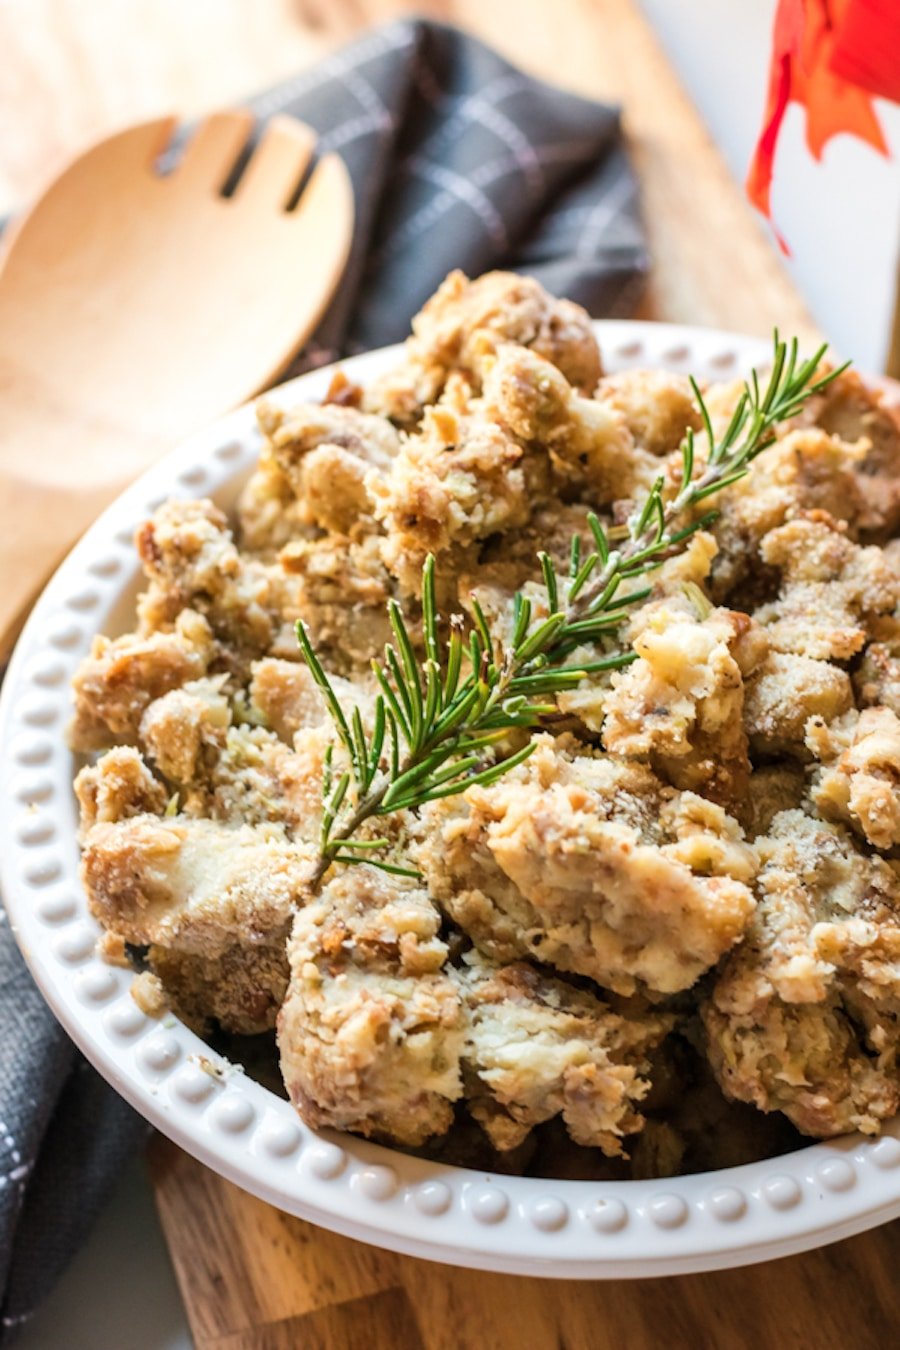 Easy Homemade Stuffing Recipe to cook inside your Thanksgiving turkey